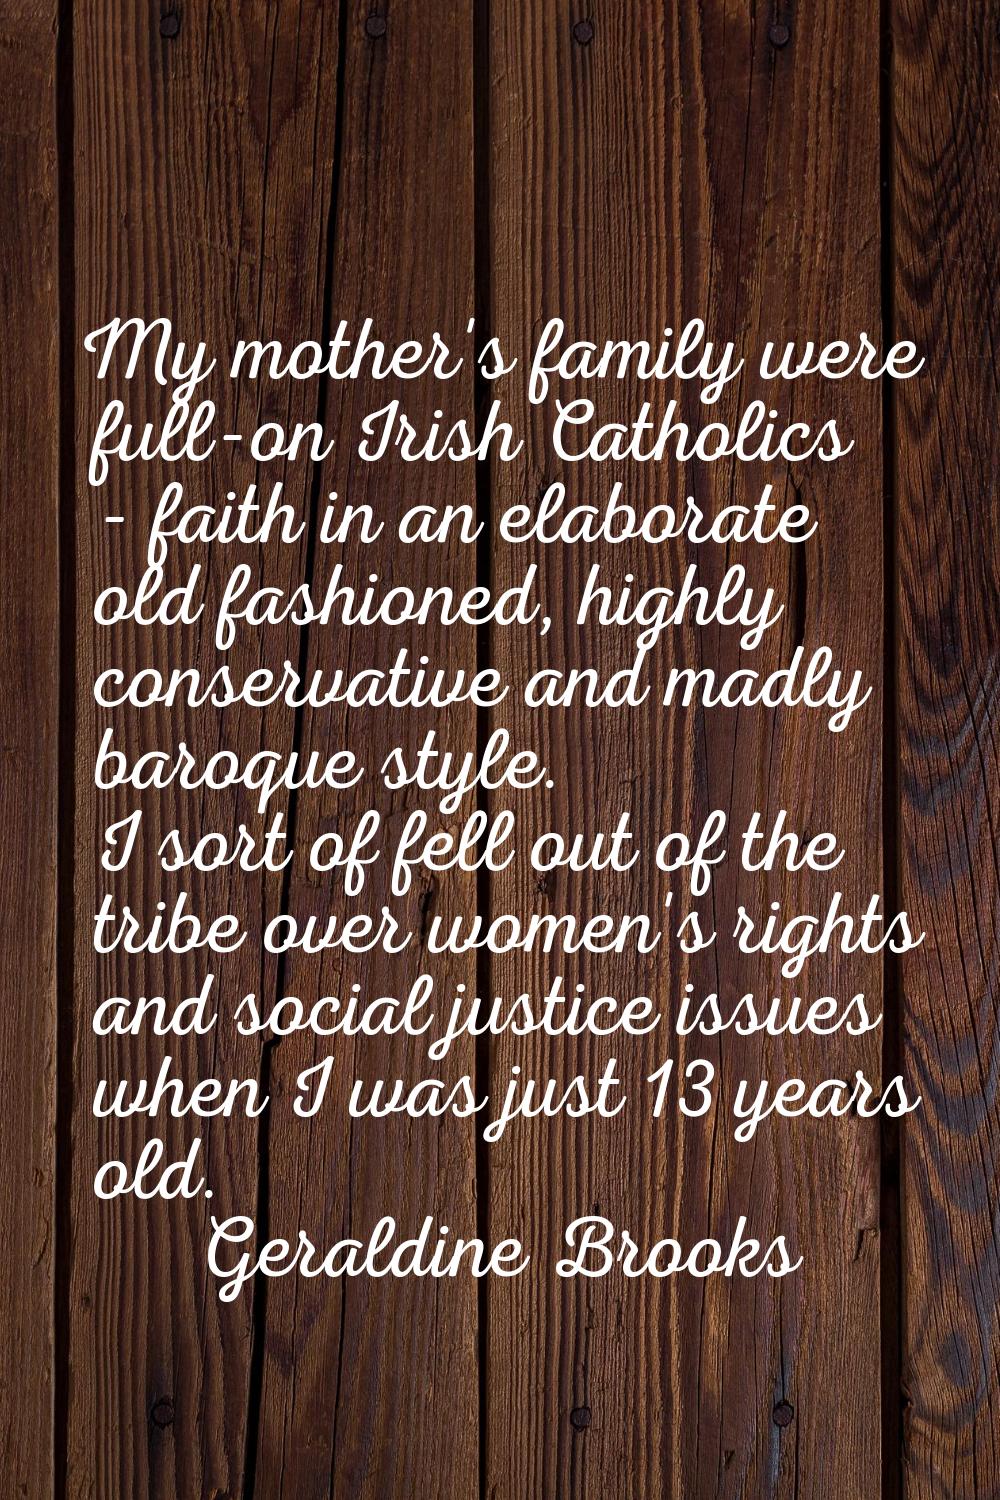 My mother's family were full-on Irish Catholics - faith in an elaborate old fashioned, highly conse